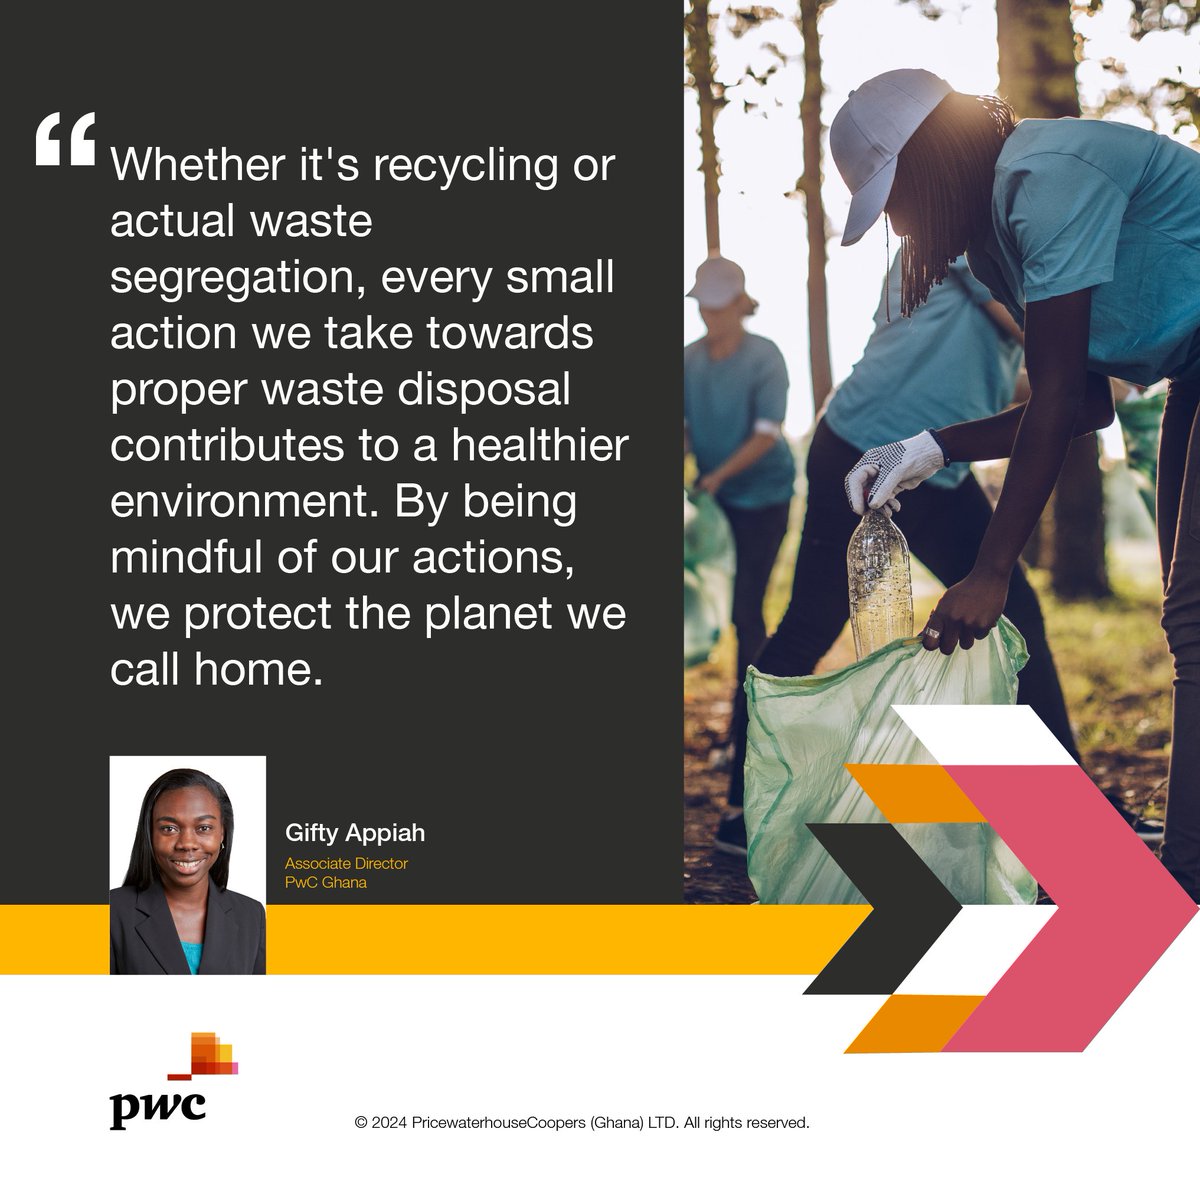 We are still shining a spotlight on the environment! Recycling leads the way. How does your organisation tackle waste management? 

#PwCProud  #Sustainability #ProtectthePlanet #RecycleRight #ESG